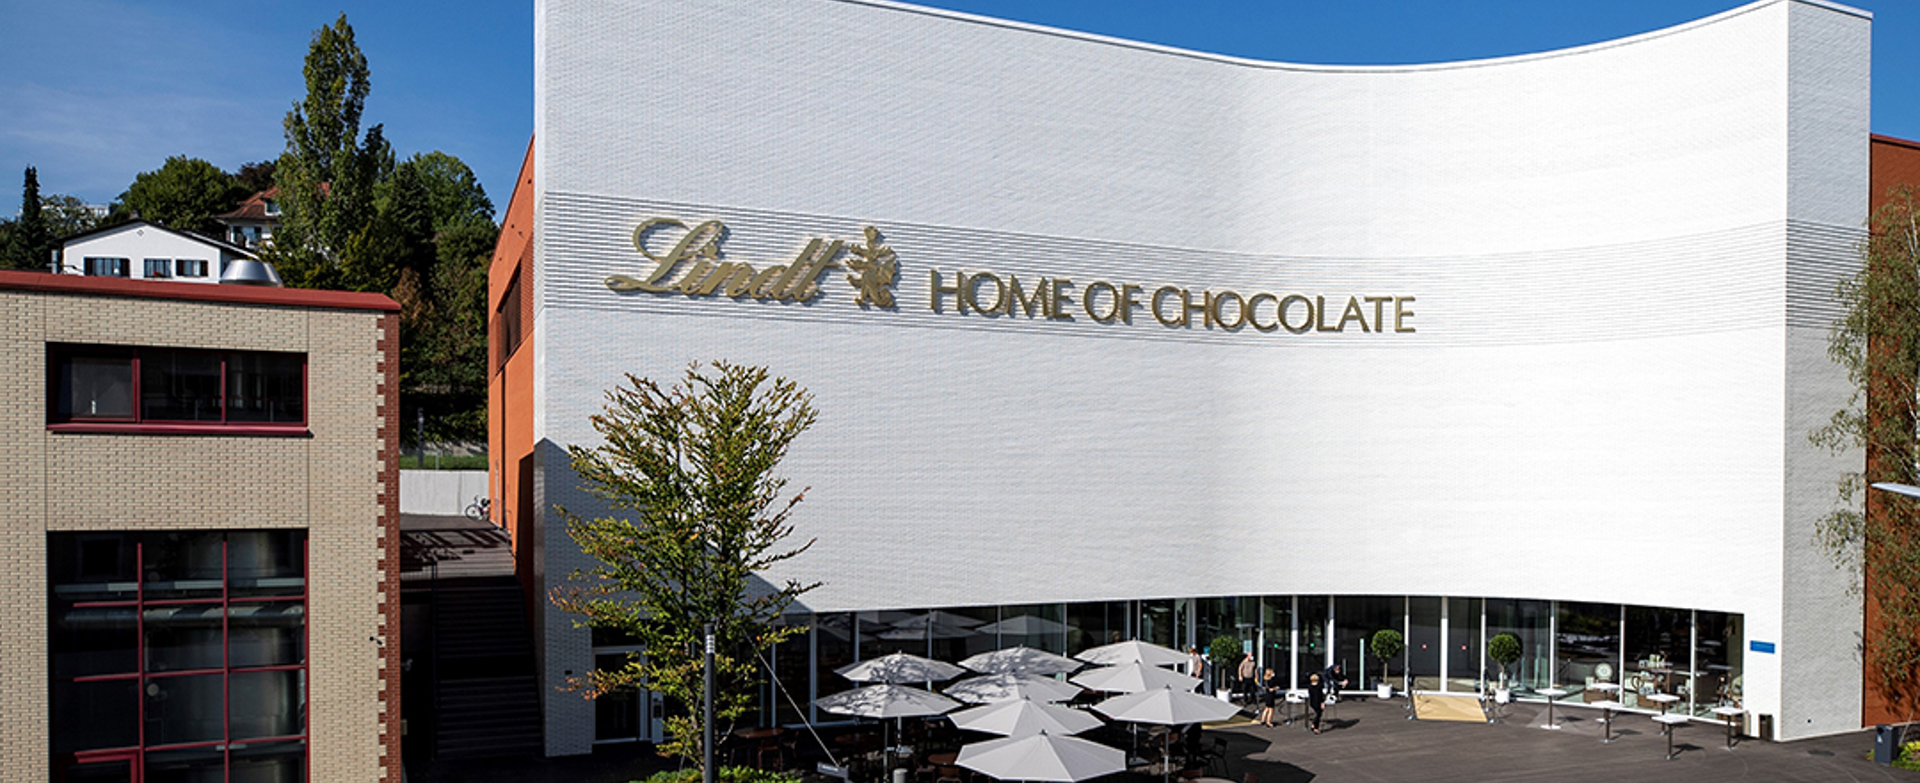 1 Lindt Home Of Chocolate